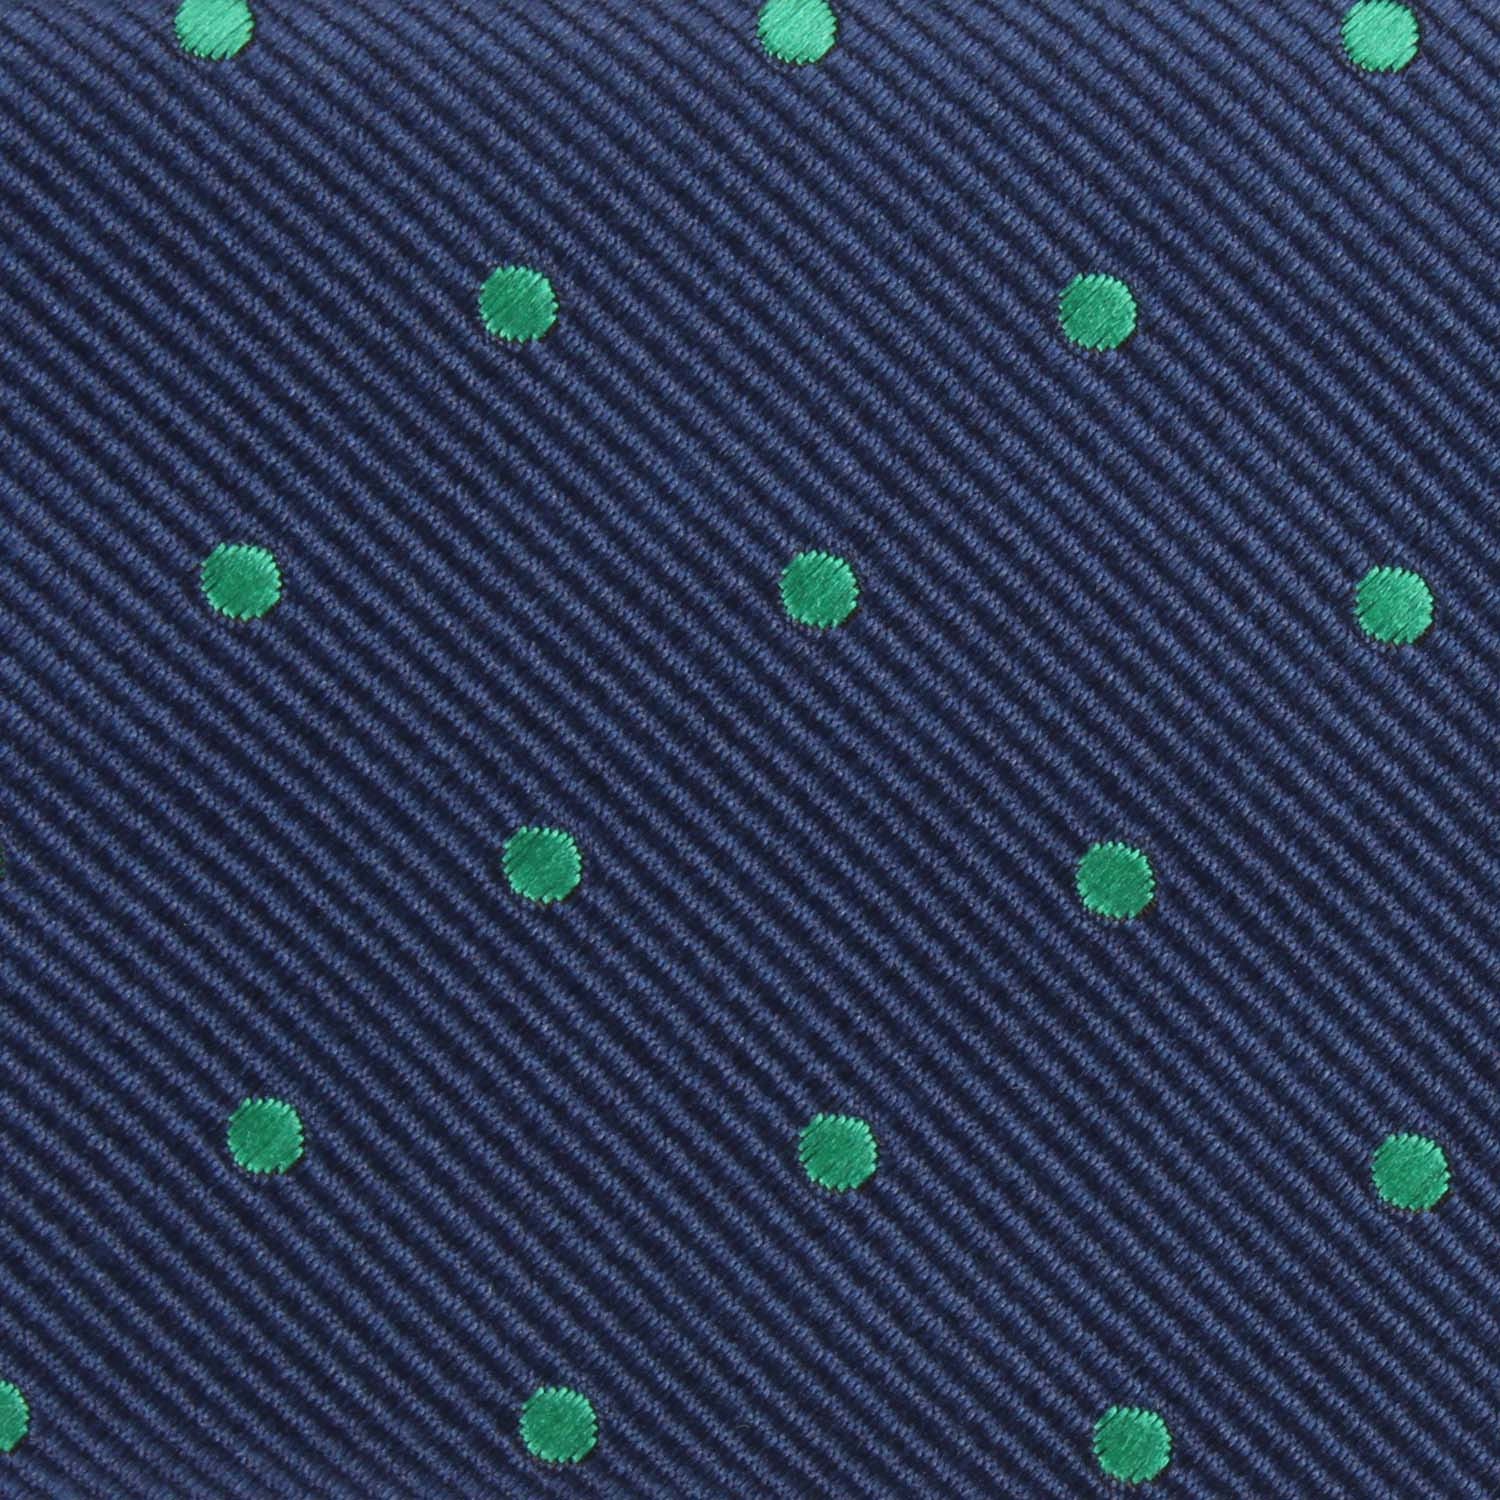 Navy Blue with Green Polka Dots Fabric Bow Tie M130